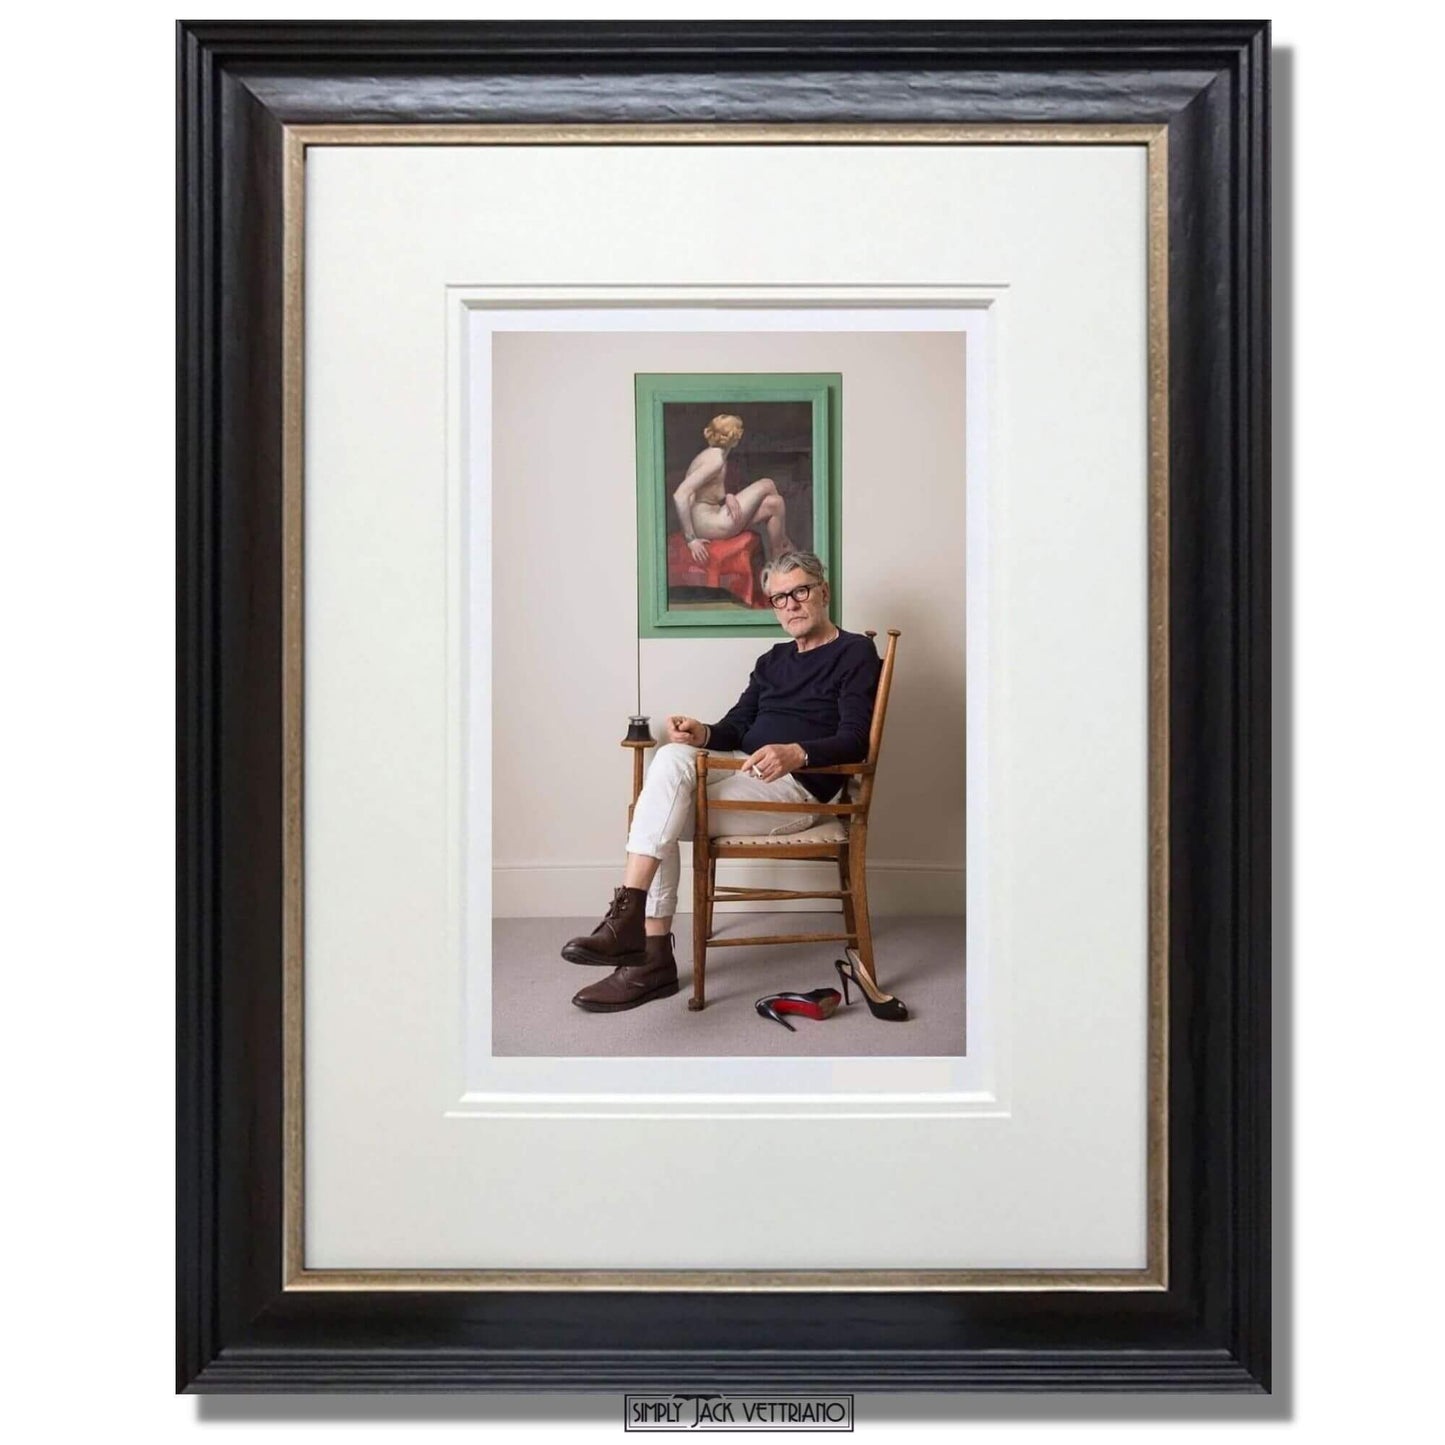 Load image into Gallery viewer, Jack Vettriano Portrait Framed Limited Edition
